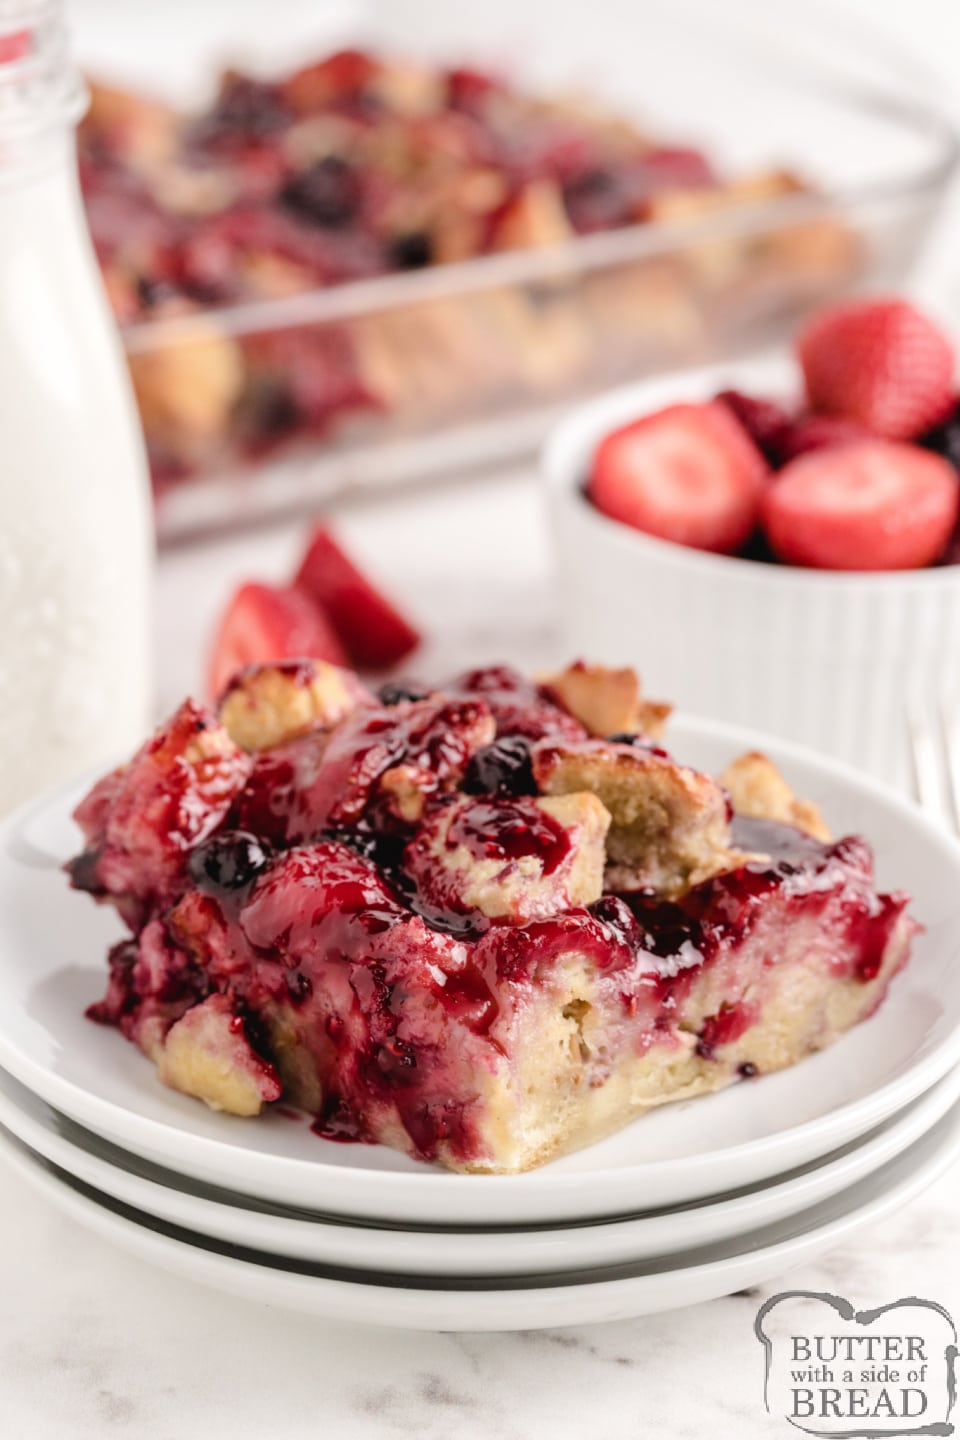 Berry French Toast Bake is made with french bread, eggs, cream, fresh strawberries and frozen mixed berries. This baked french toast recipe is simple, delicious and perfect for breakfast or dinner!